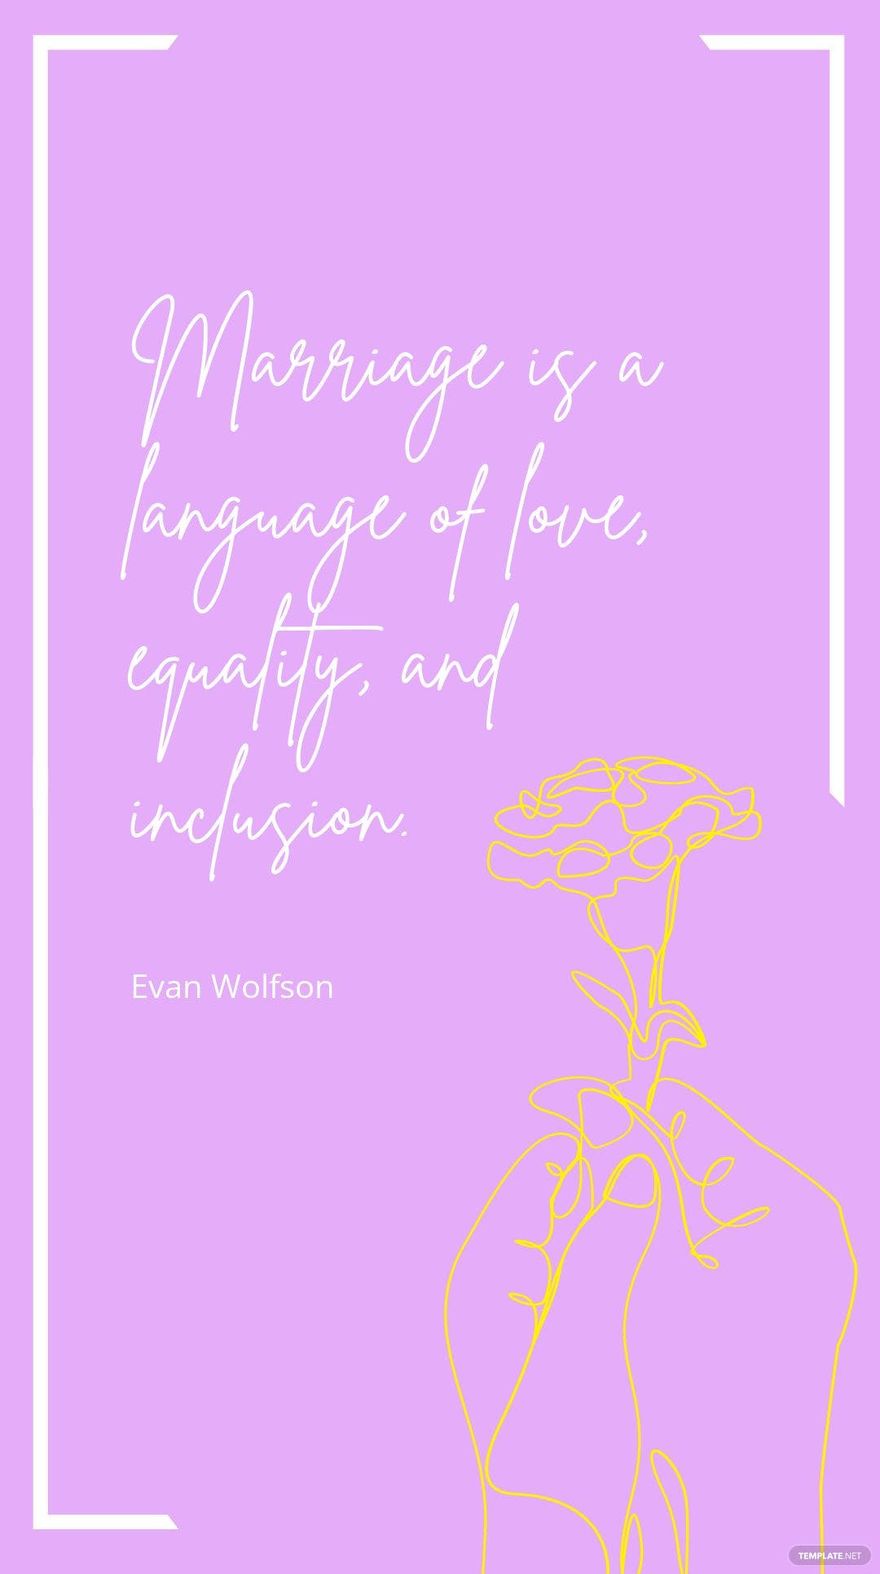 Evan Wolfson - Marriage is a language of love, equality, and inclusion. in JPG